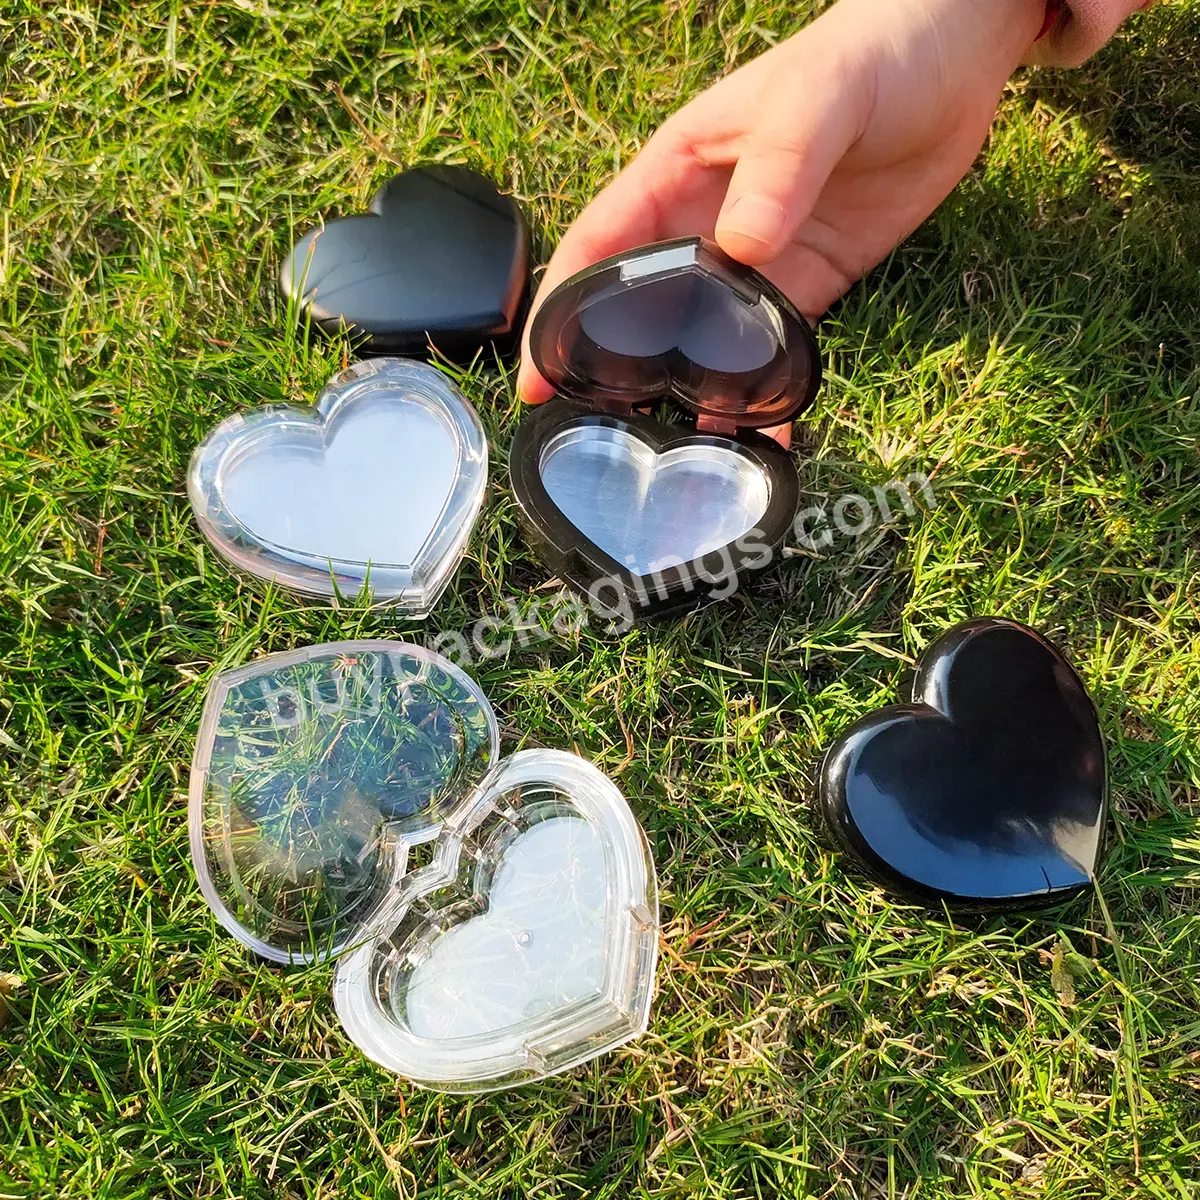 Hotsale Blusher Case Blush Container Powder Blush Case With Mirror Heart Shaped Compact Box Eyeshadow Case - Buy Single Clear Makeup Empty Transparent Heart Blush Blusher Container Heart Shaped Pan Mini Compact Powder Case,Heart Shape Powder Compact